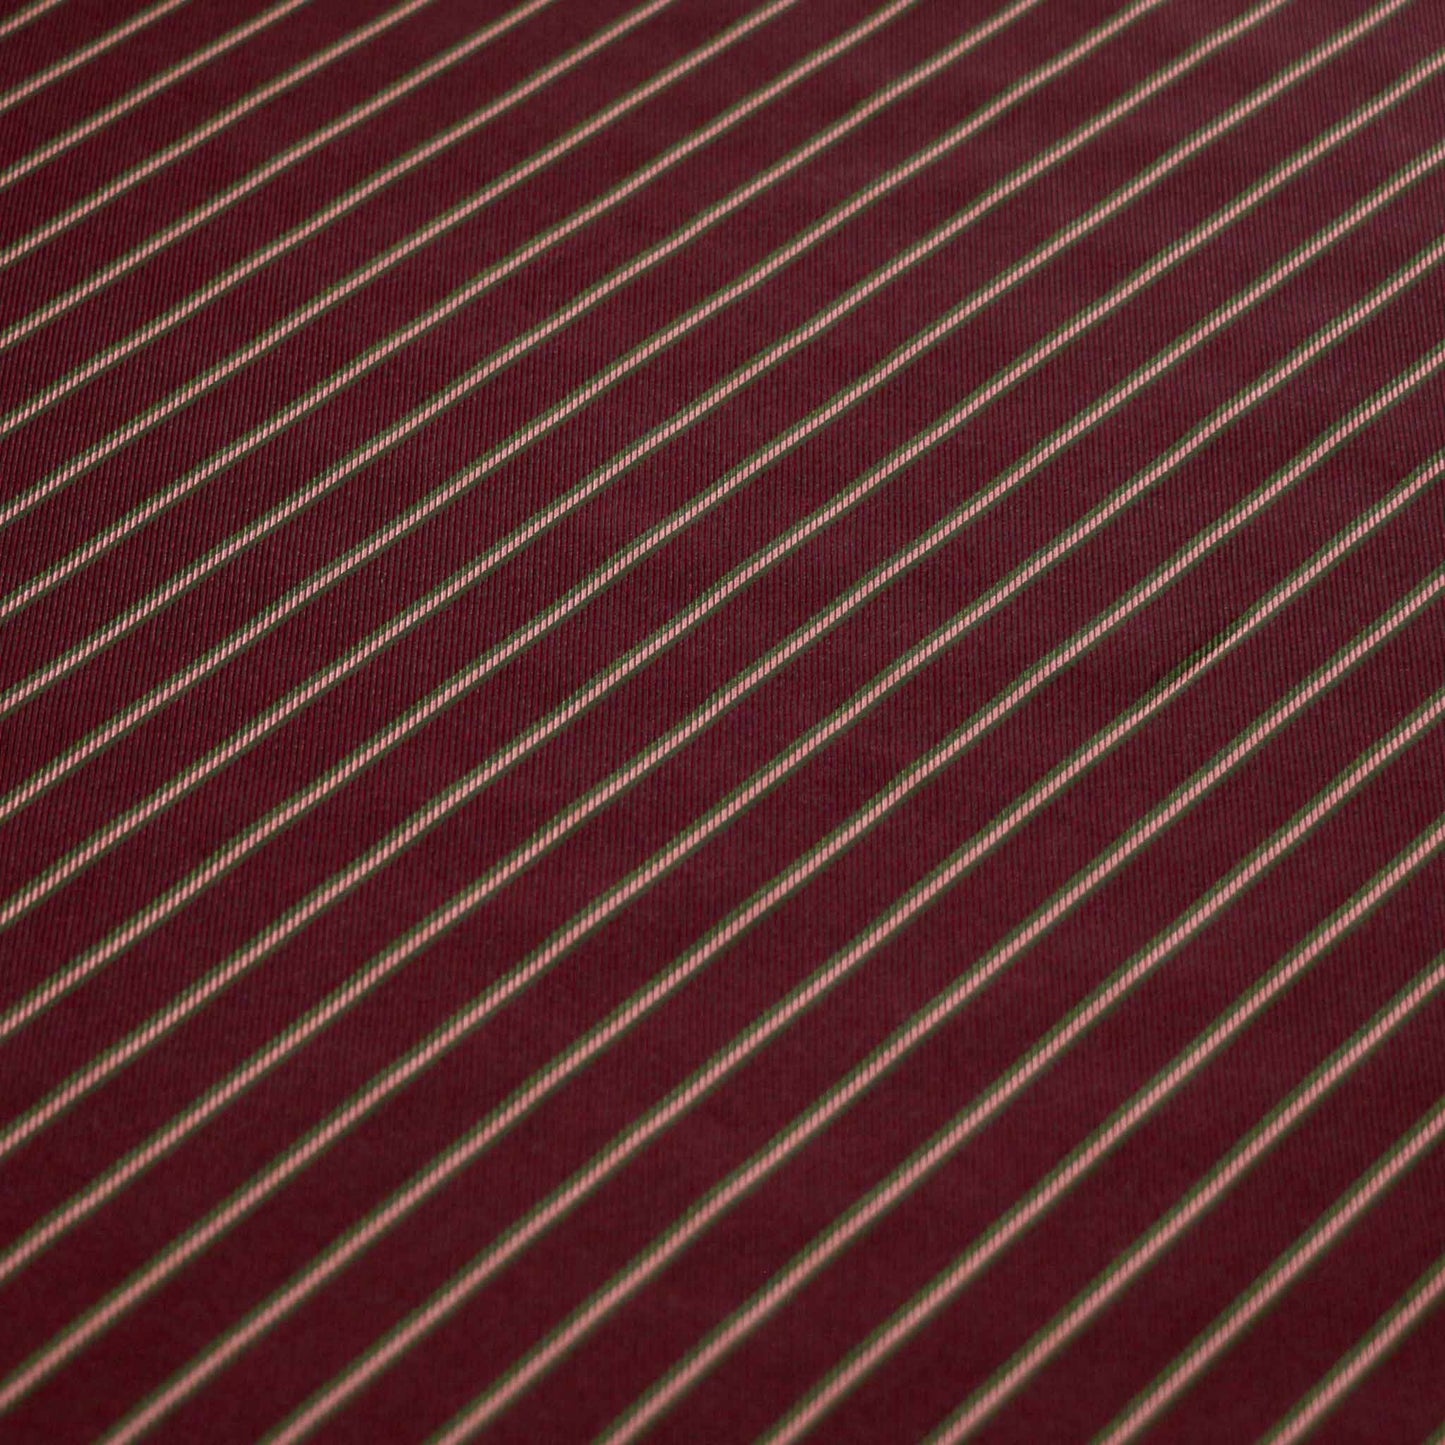 maroon twill lining viscose fabric for dressmaking with pink and green striped pattern